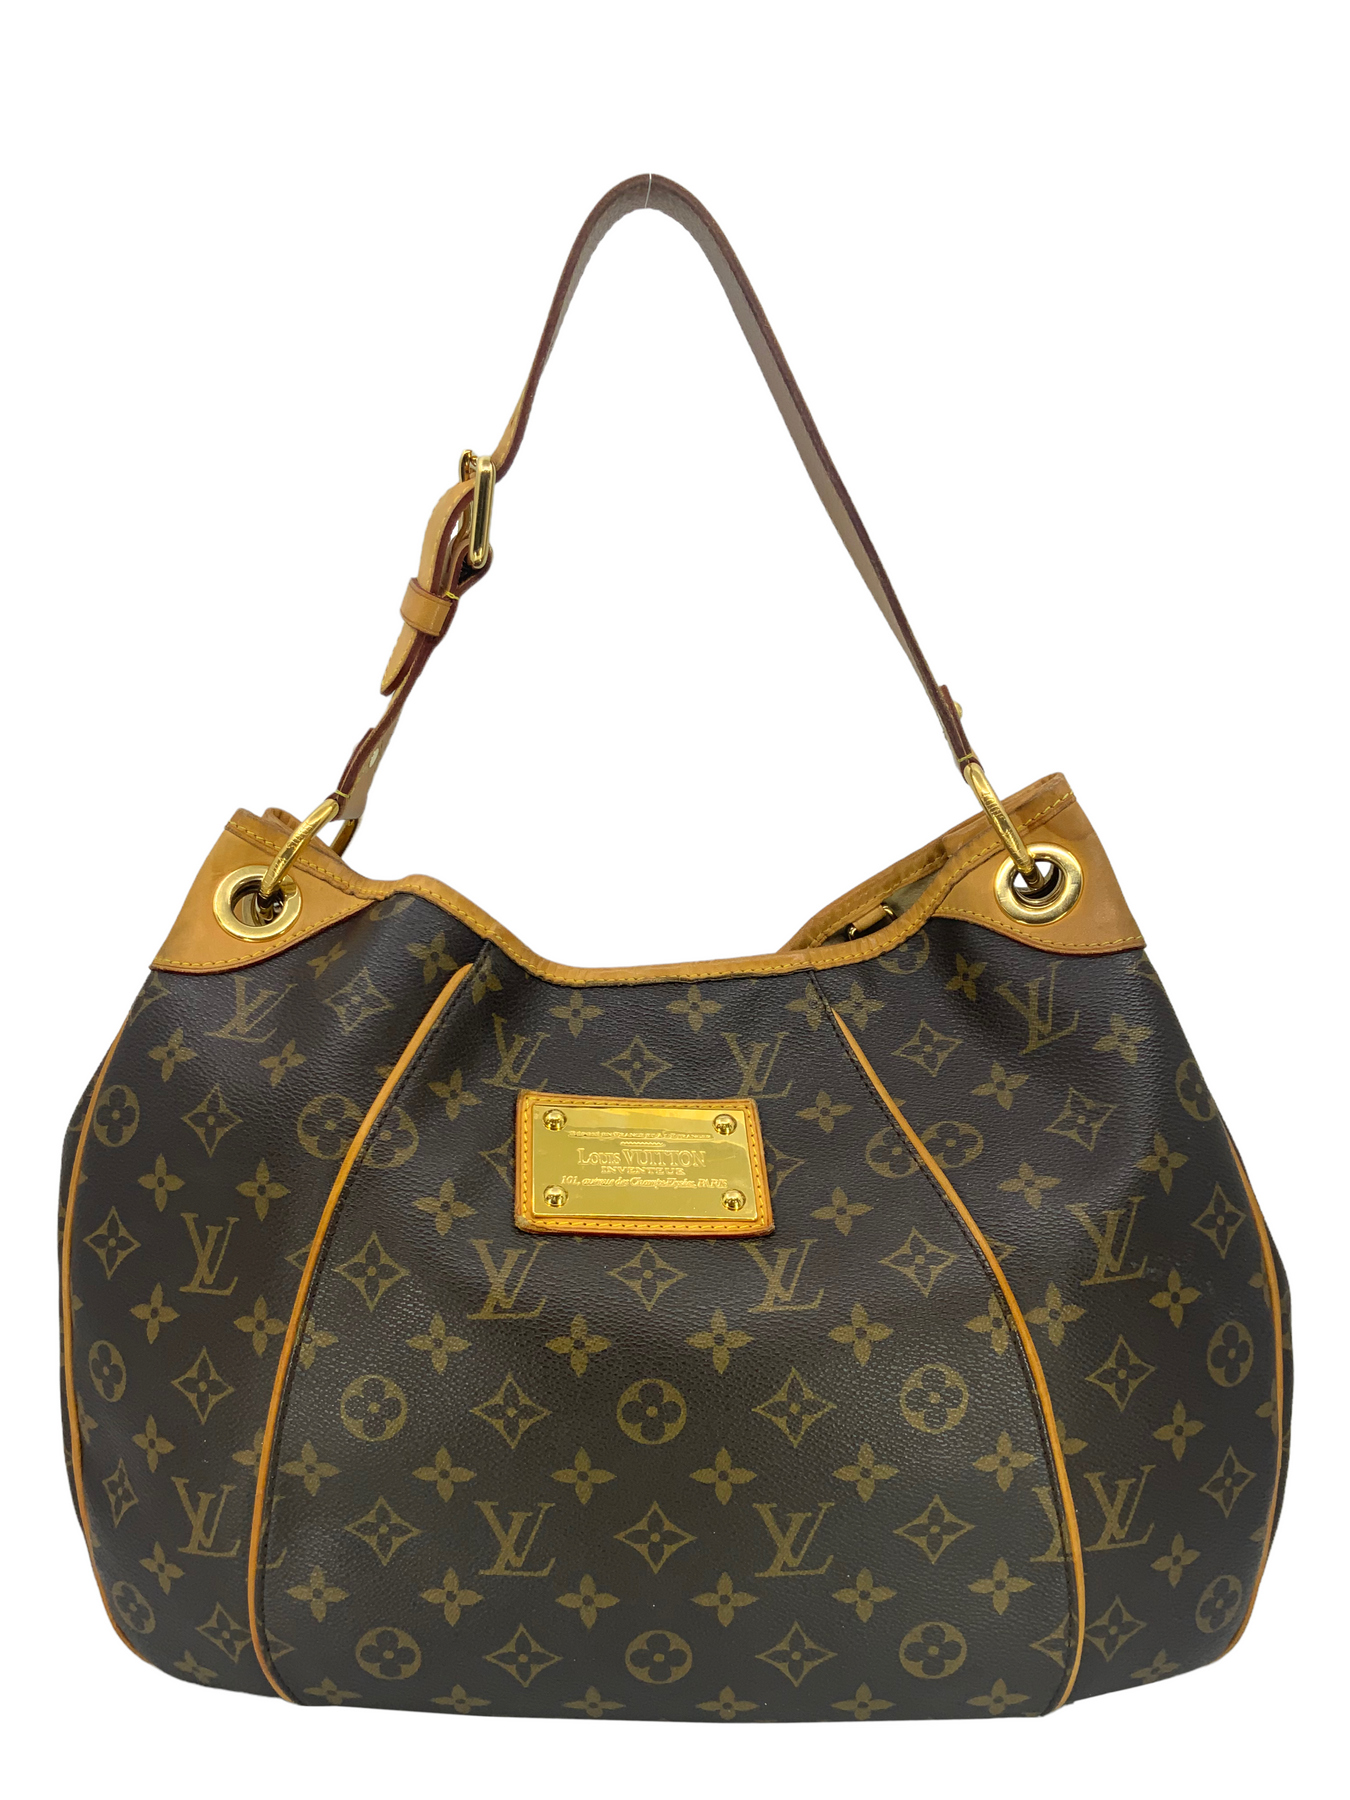 Louis Vuitton Galliera Leather Exterior Bags & Handbags for Women, Authenticity Guaranteed